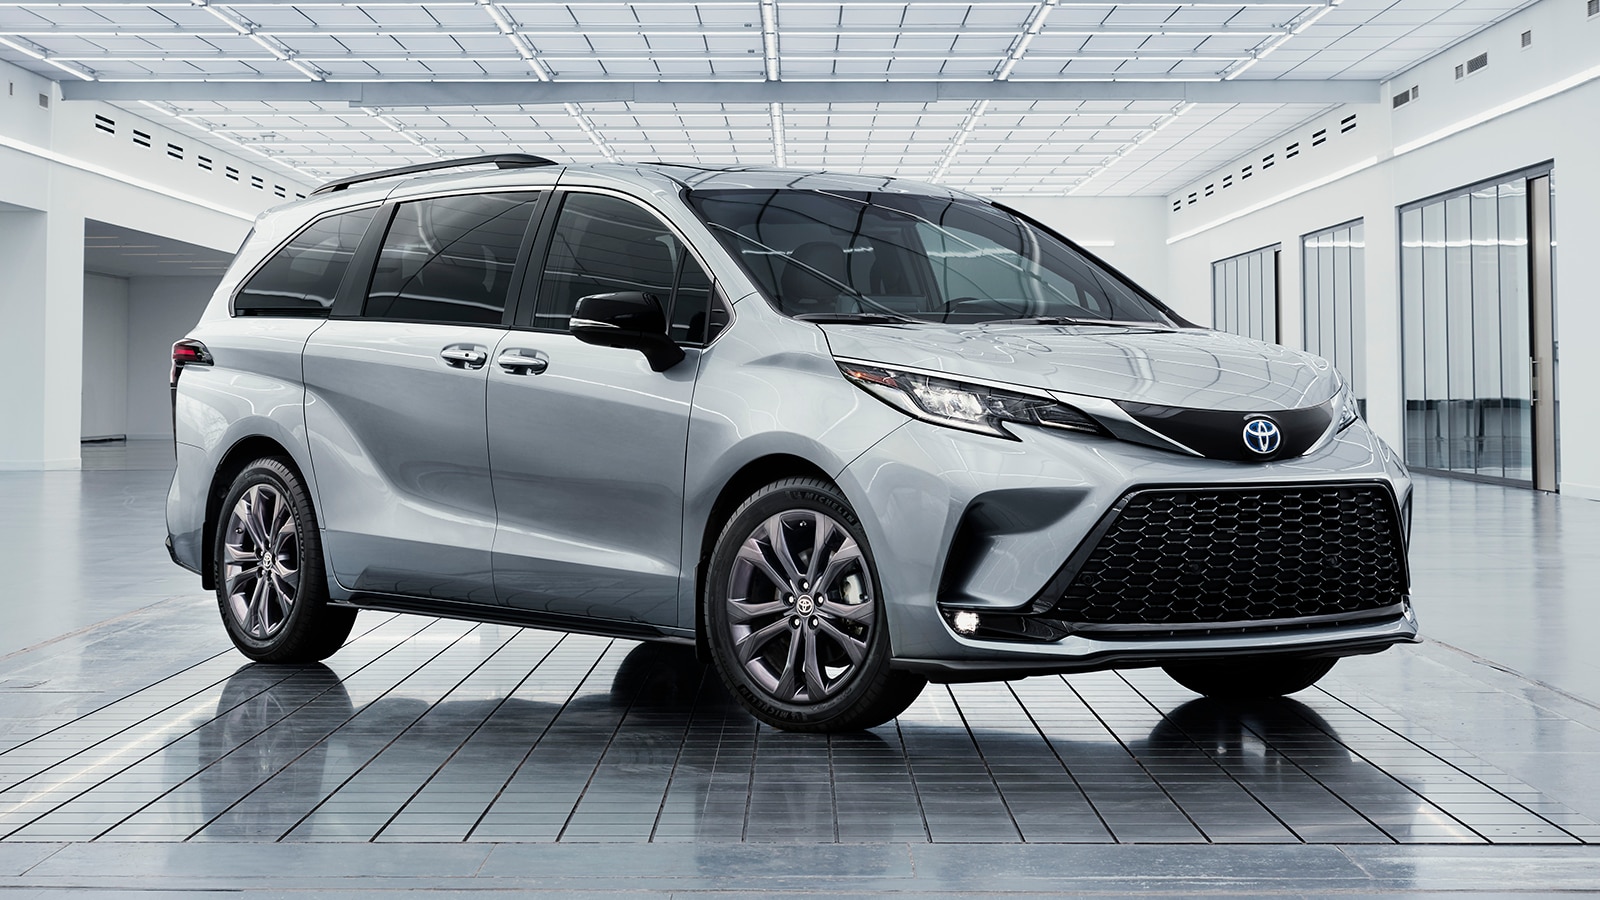 Limited Edition 2023 Toyota Sienna Celebrates 25 Years and 2.2 Million Vans Sold